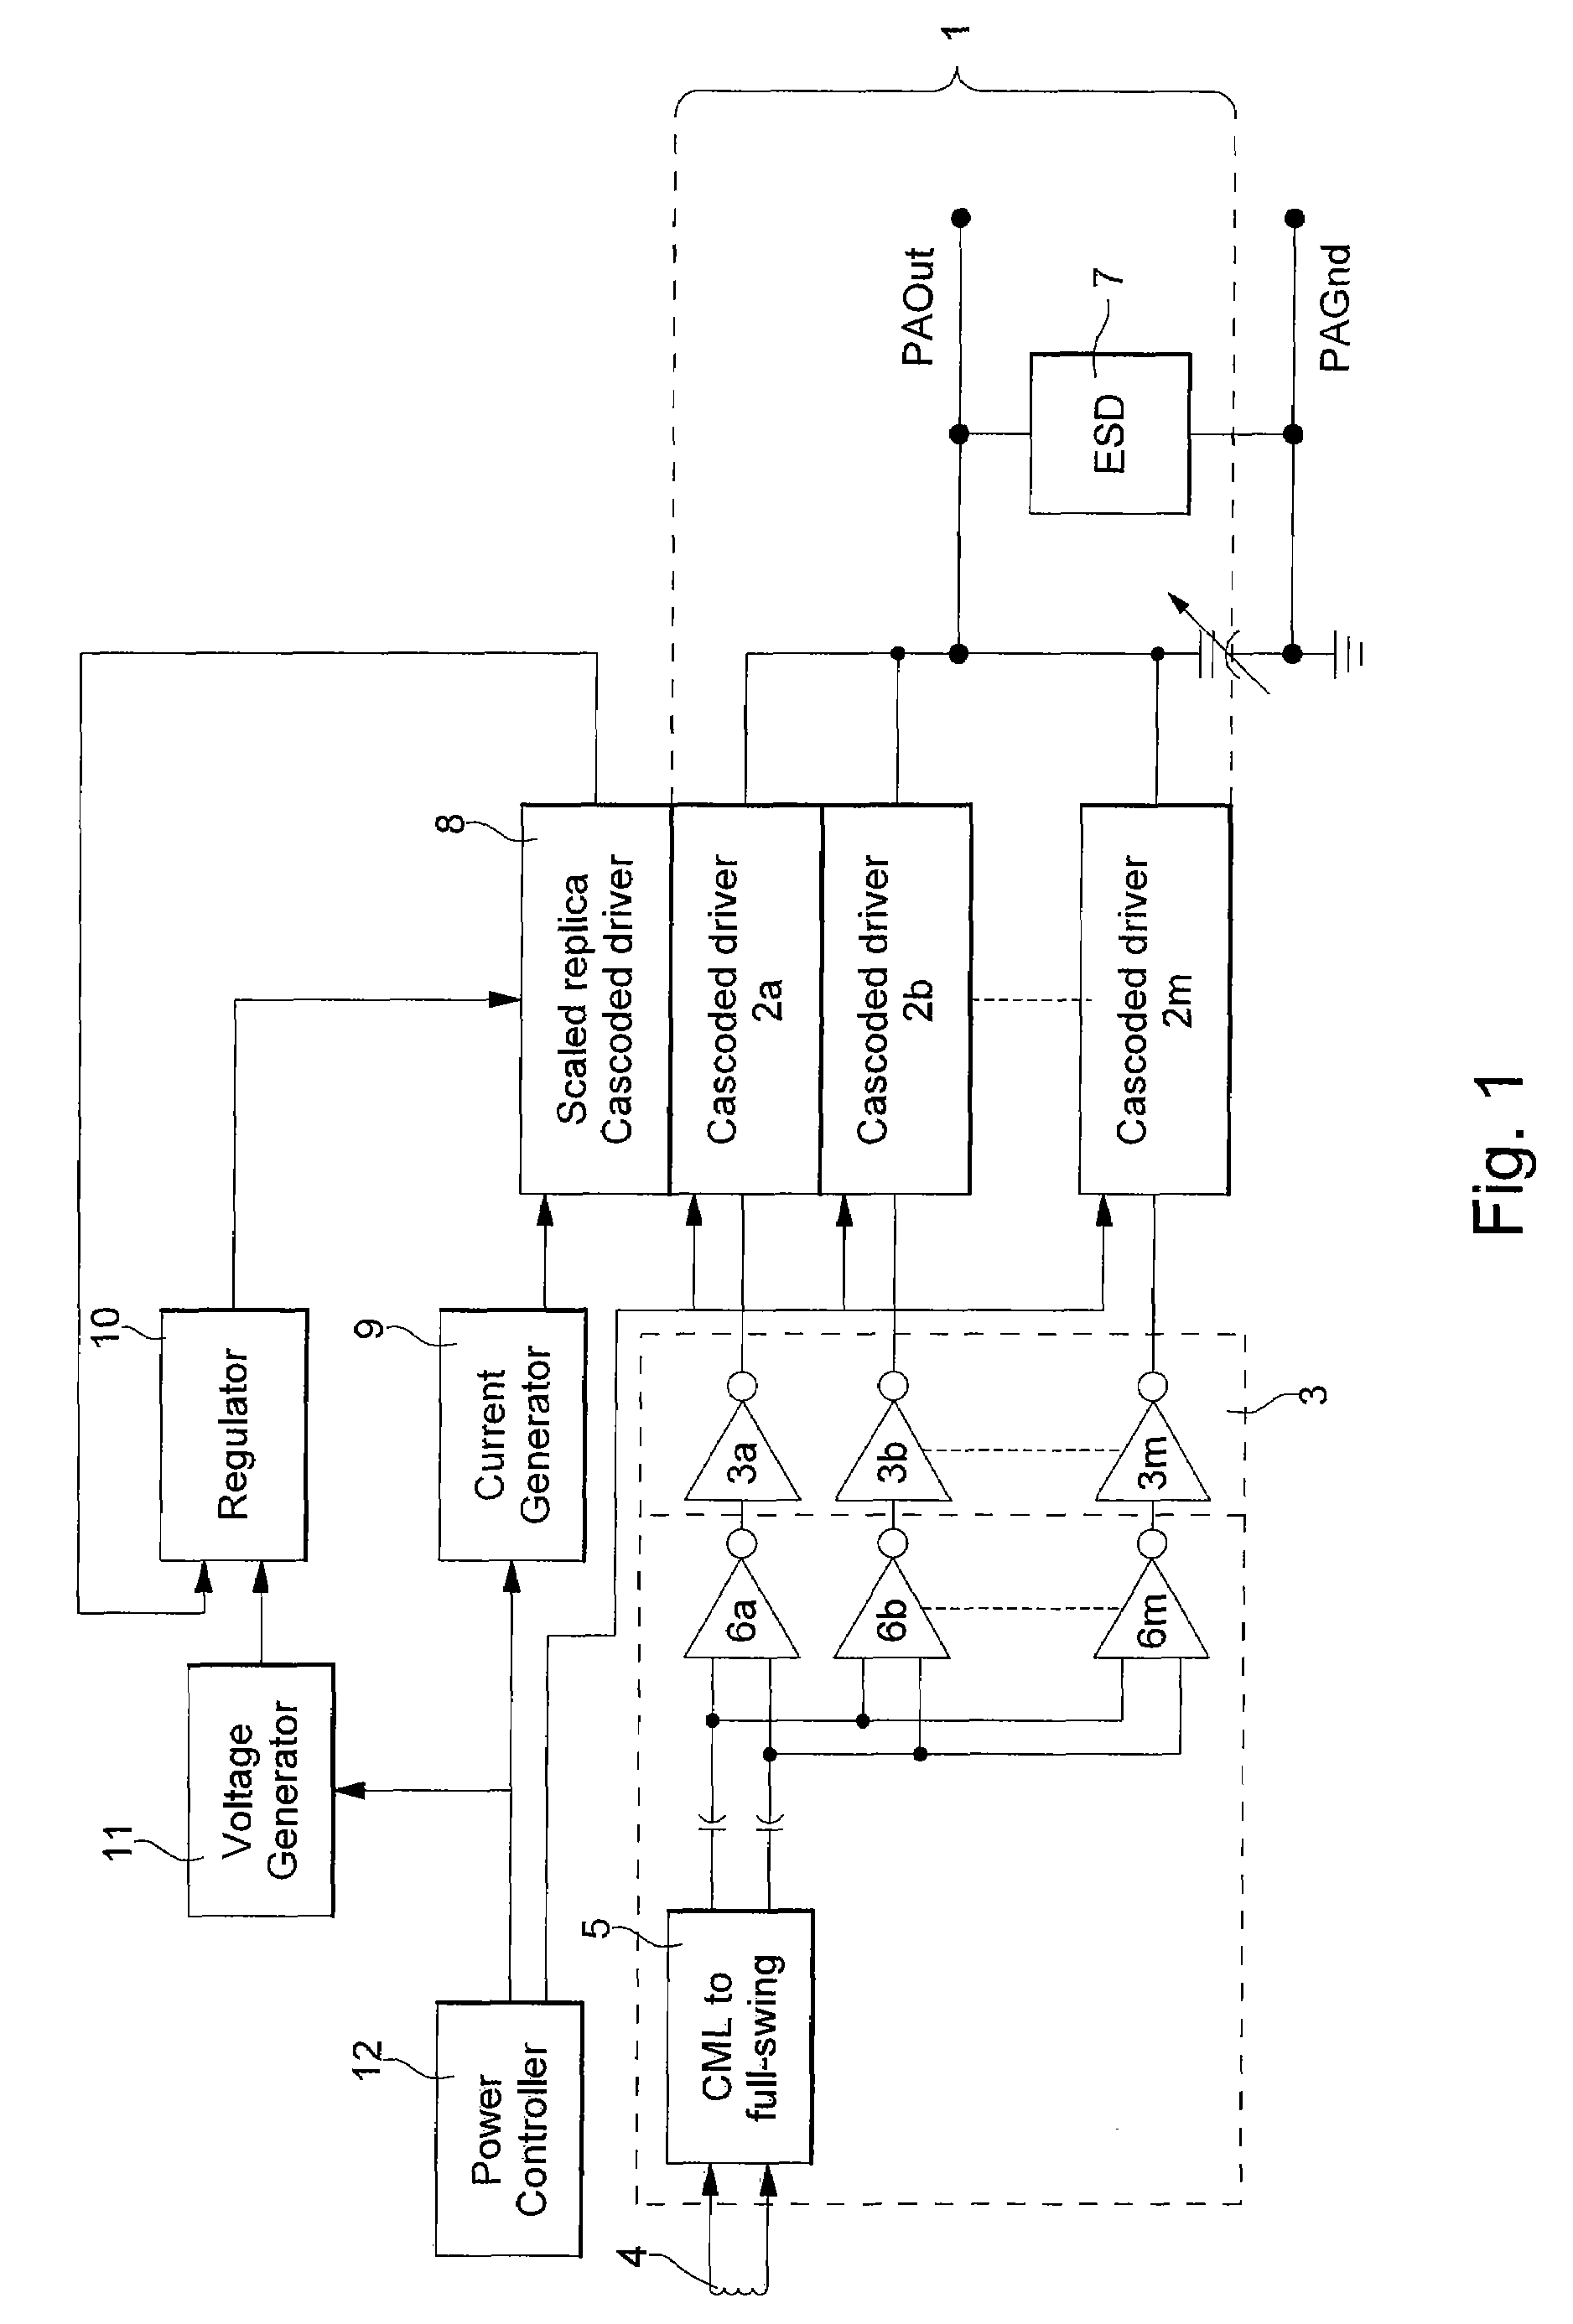 Power amplifier with controlled output power